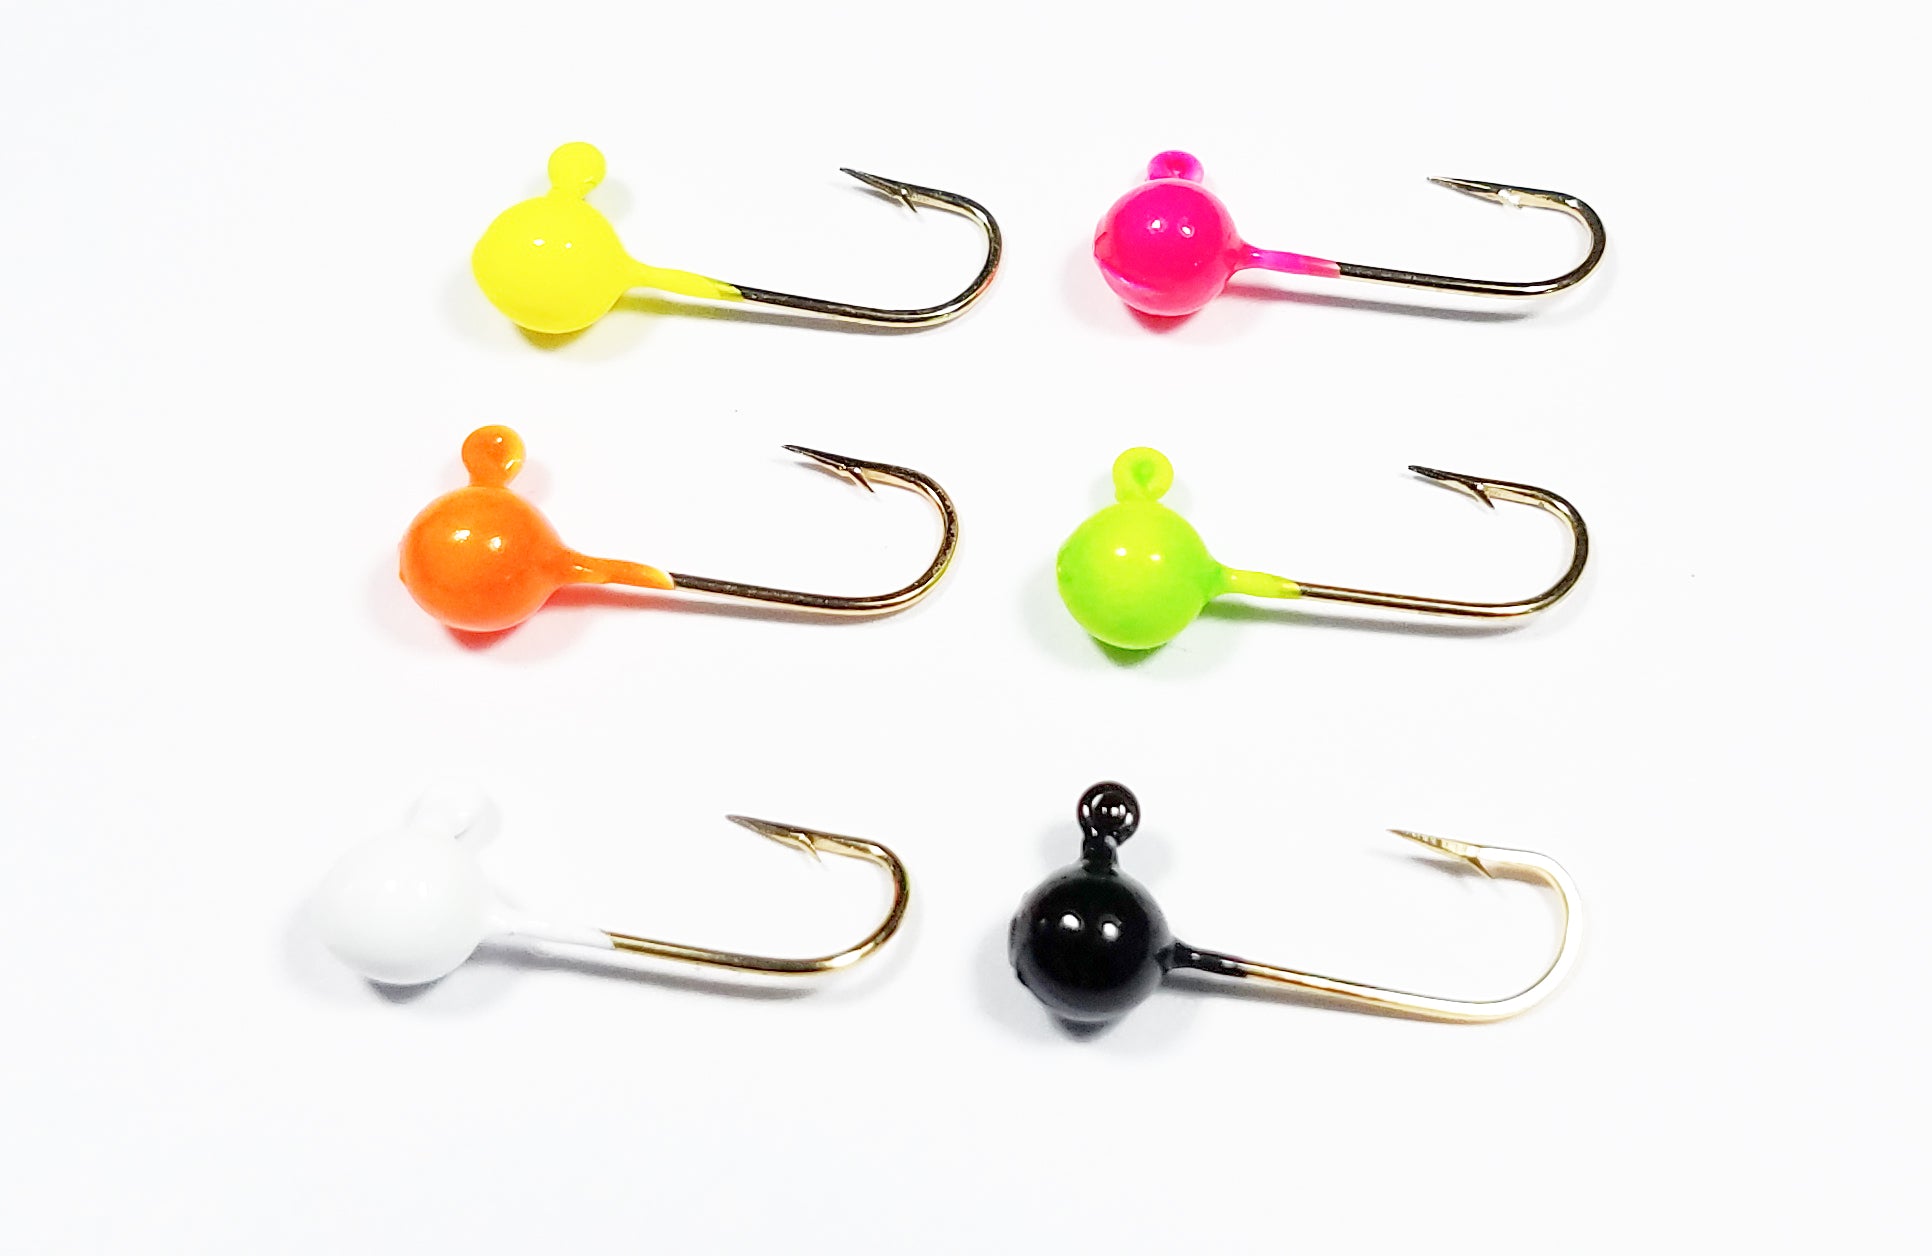 OBSESSION Lead Jig Head Fishing Hooks Multicolor Saltwater Barbed